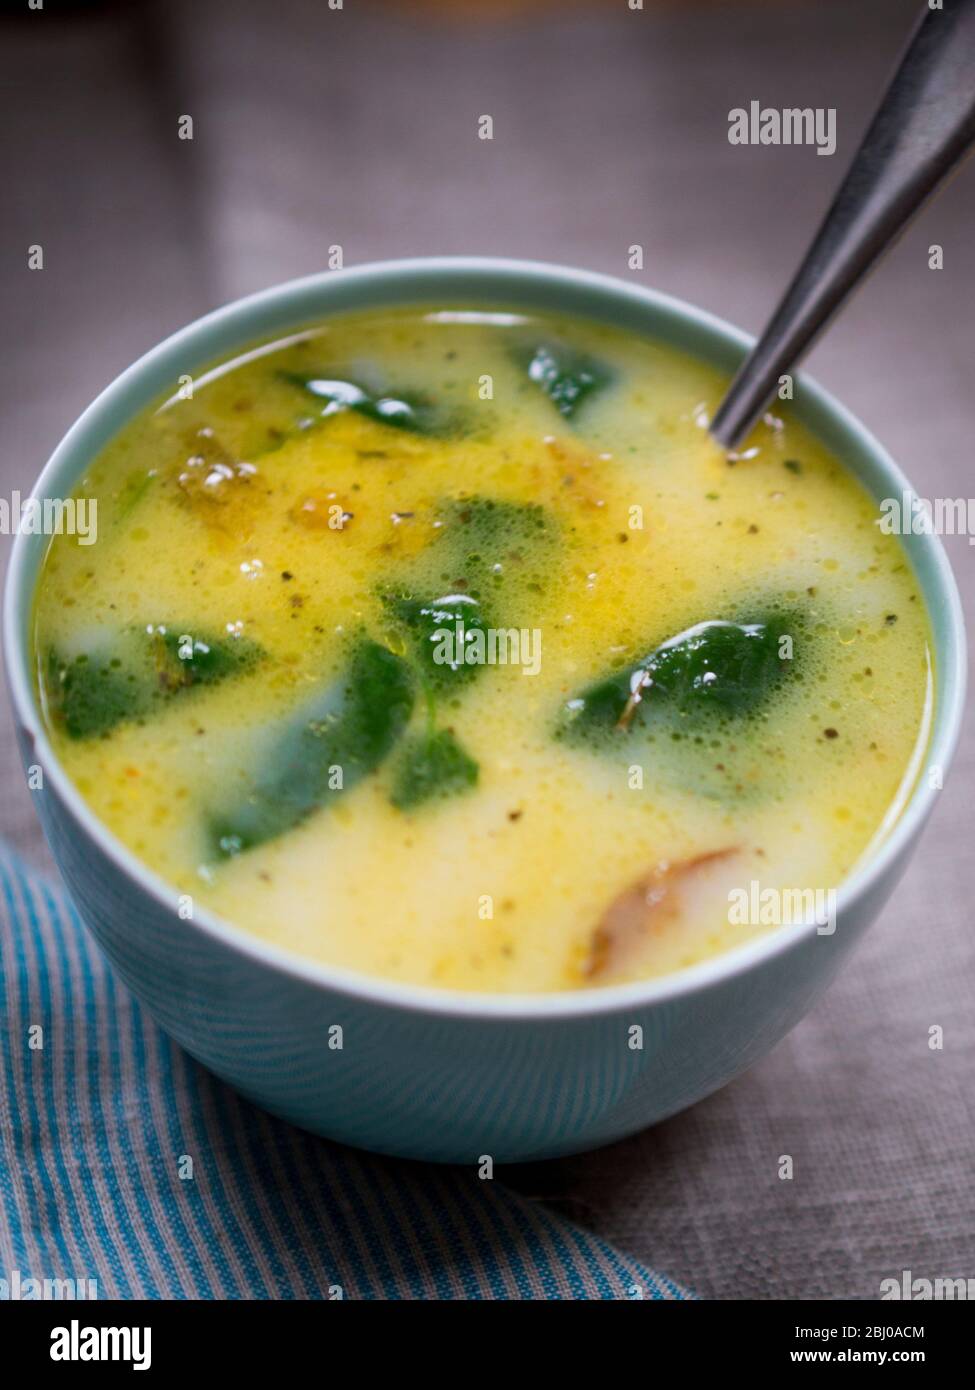 Chicken soup made from stock from boiled up chicken carcase with carrots, sweetcorn, and spinach Stock Photo